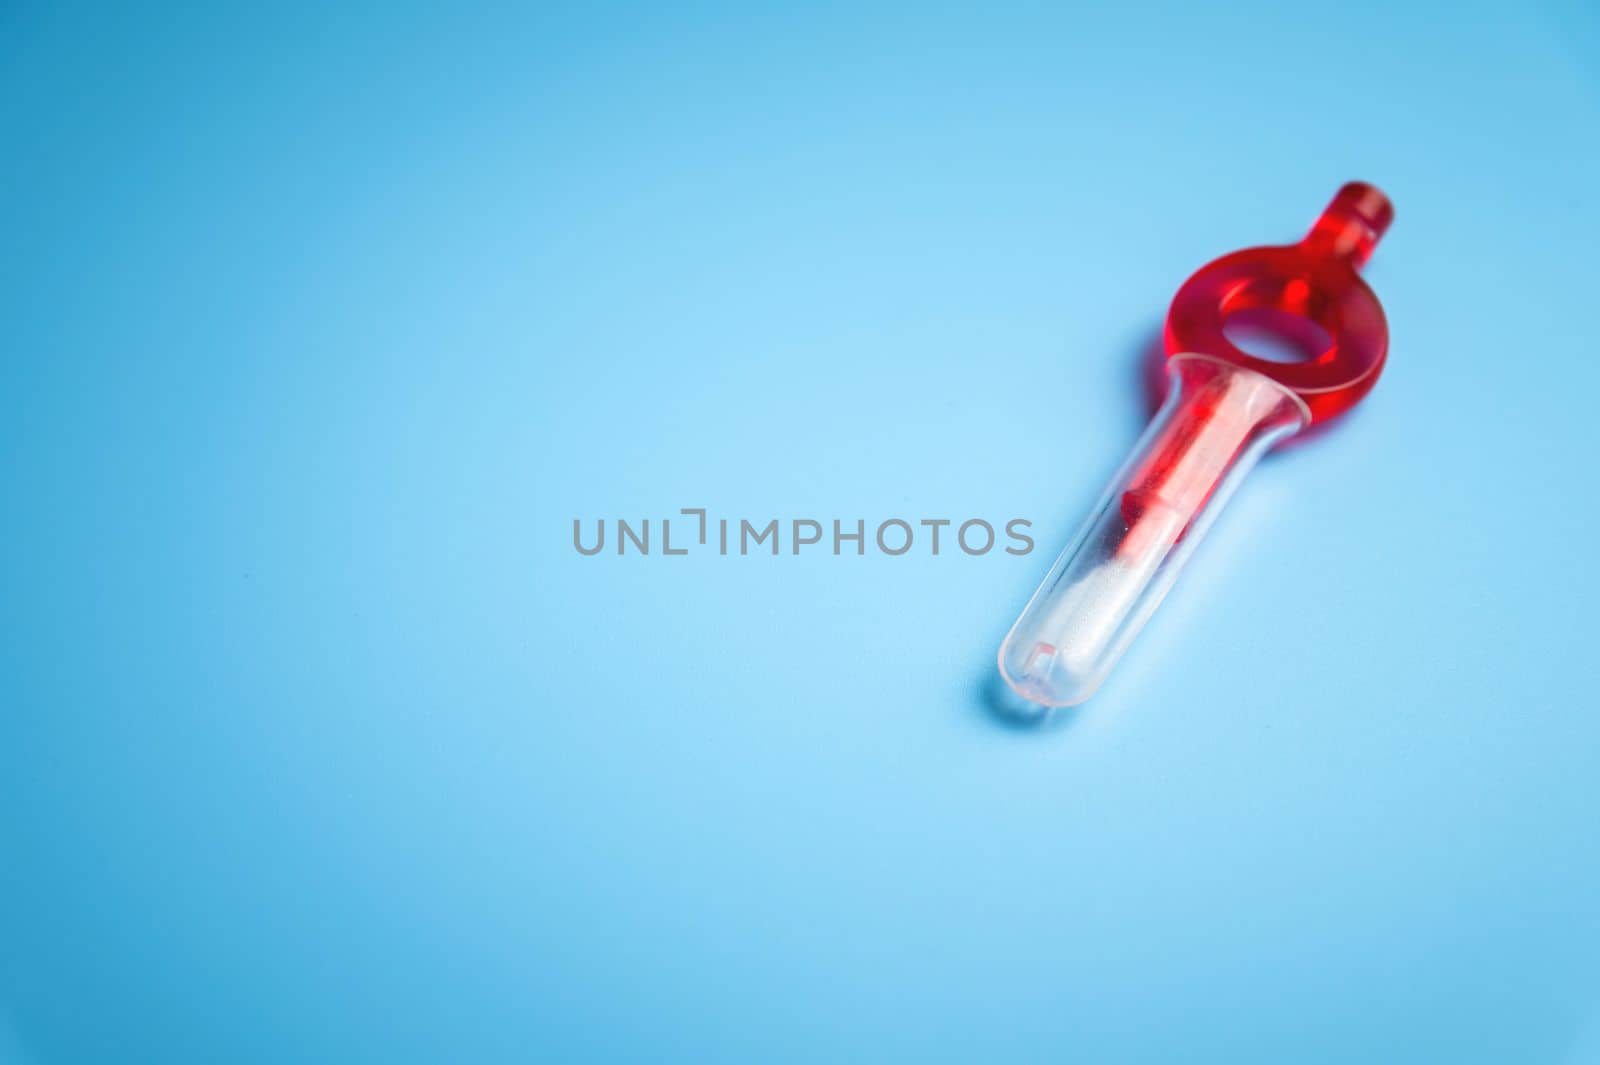 red interdental orthodontic new toothbrush on blue background, banner mockup.